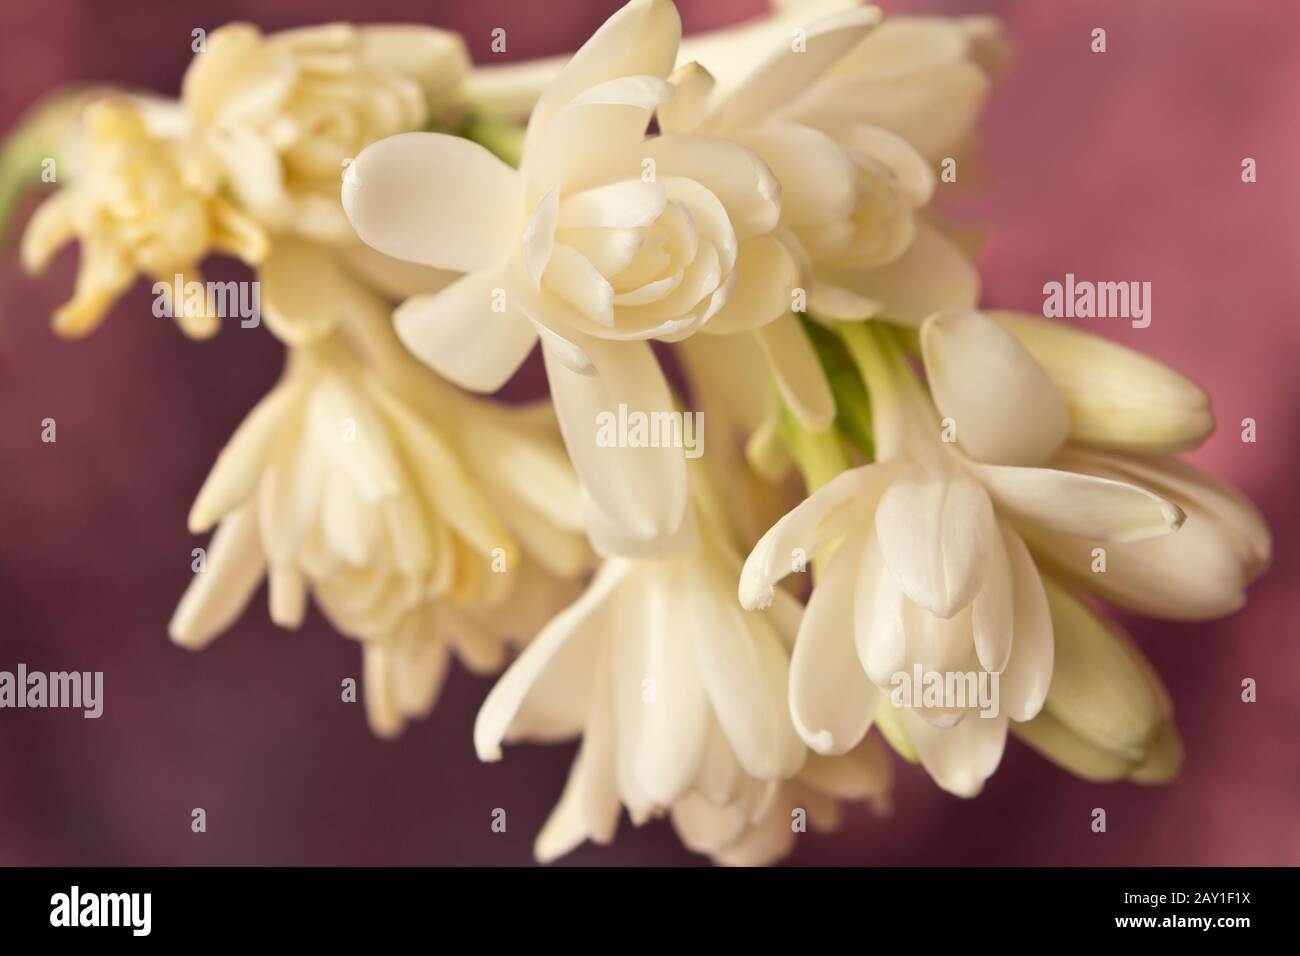 Close-up of white tuberose flowers, in front of a soft red background. Stock Photo